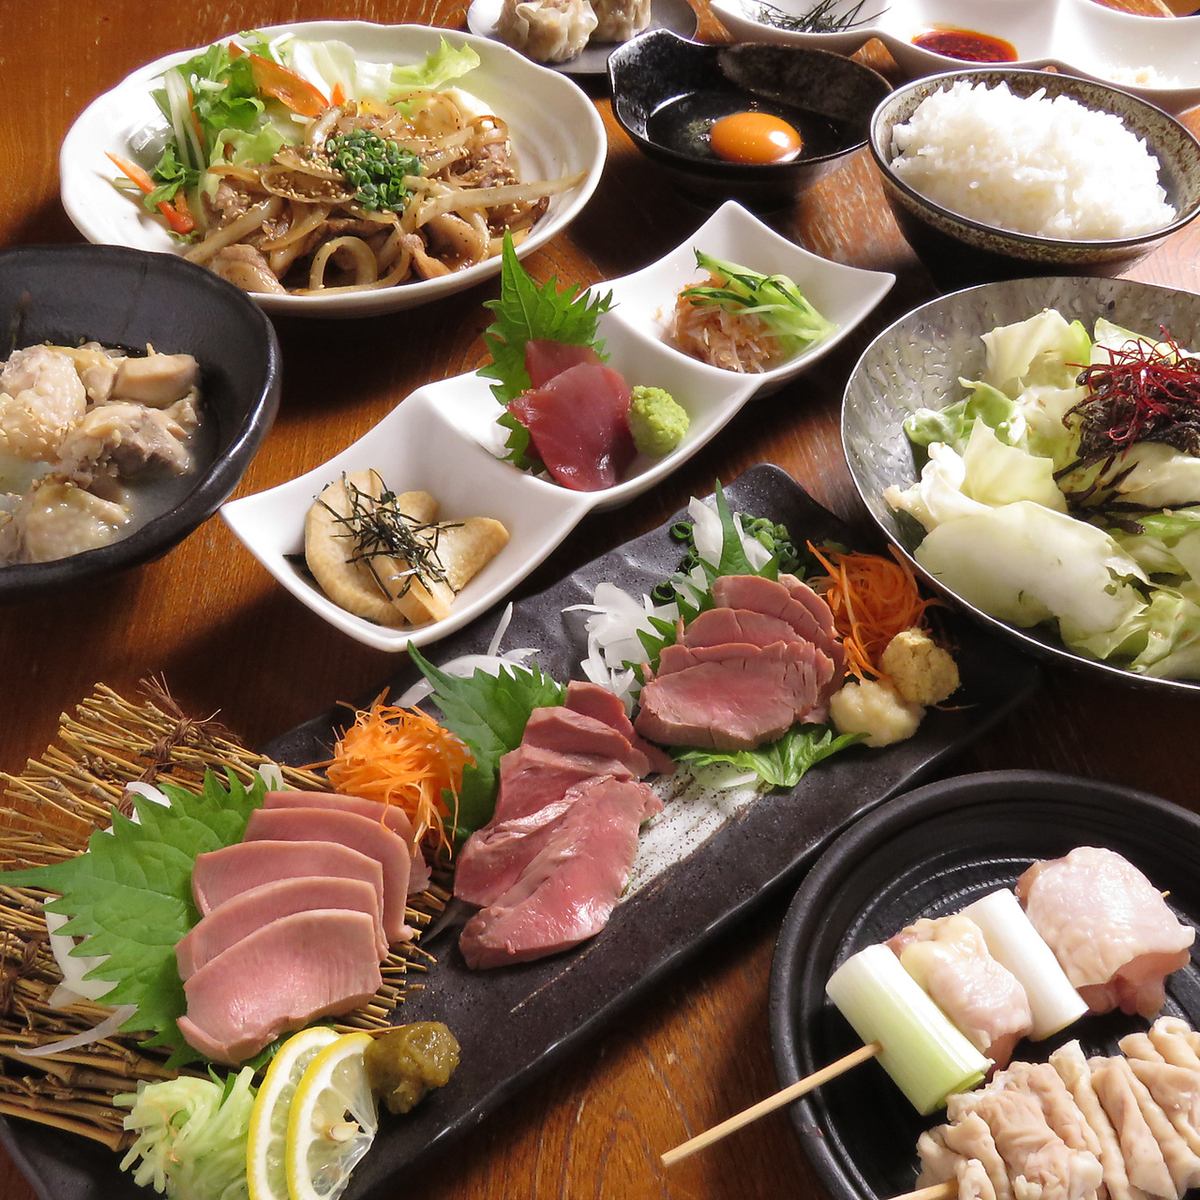 Great value course where you can enjoy our specialty skewers and specialty meat dishes♪